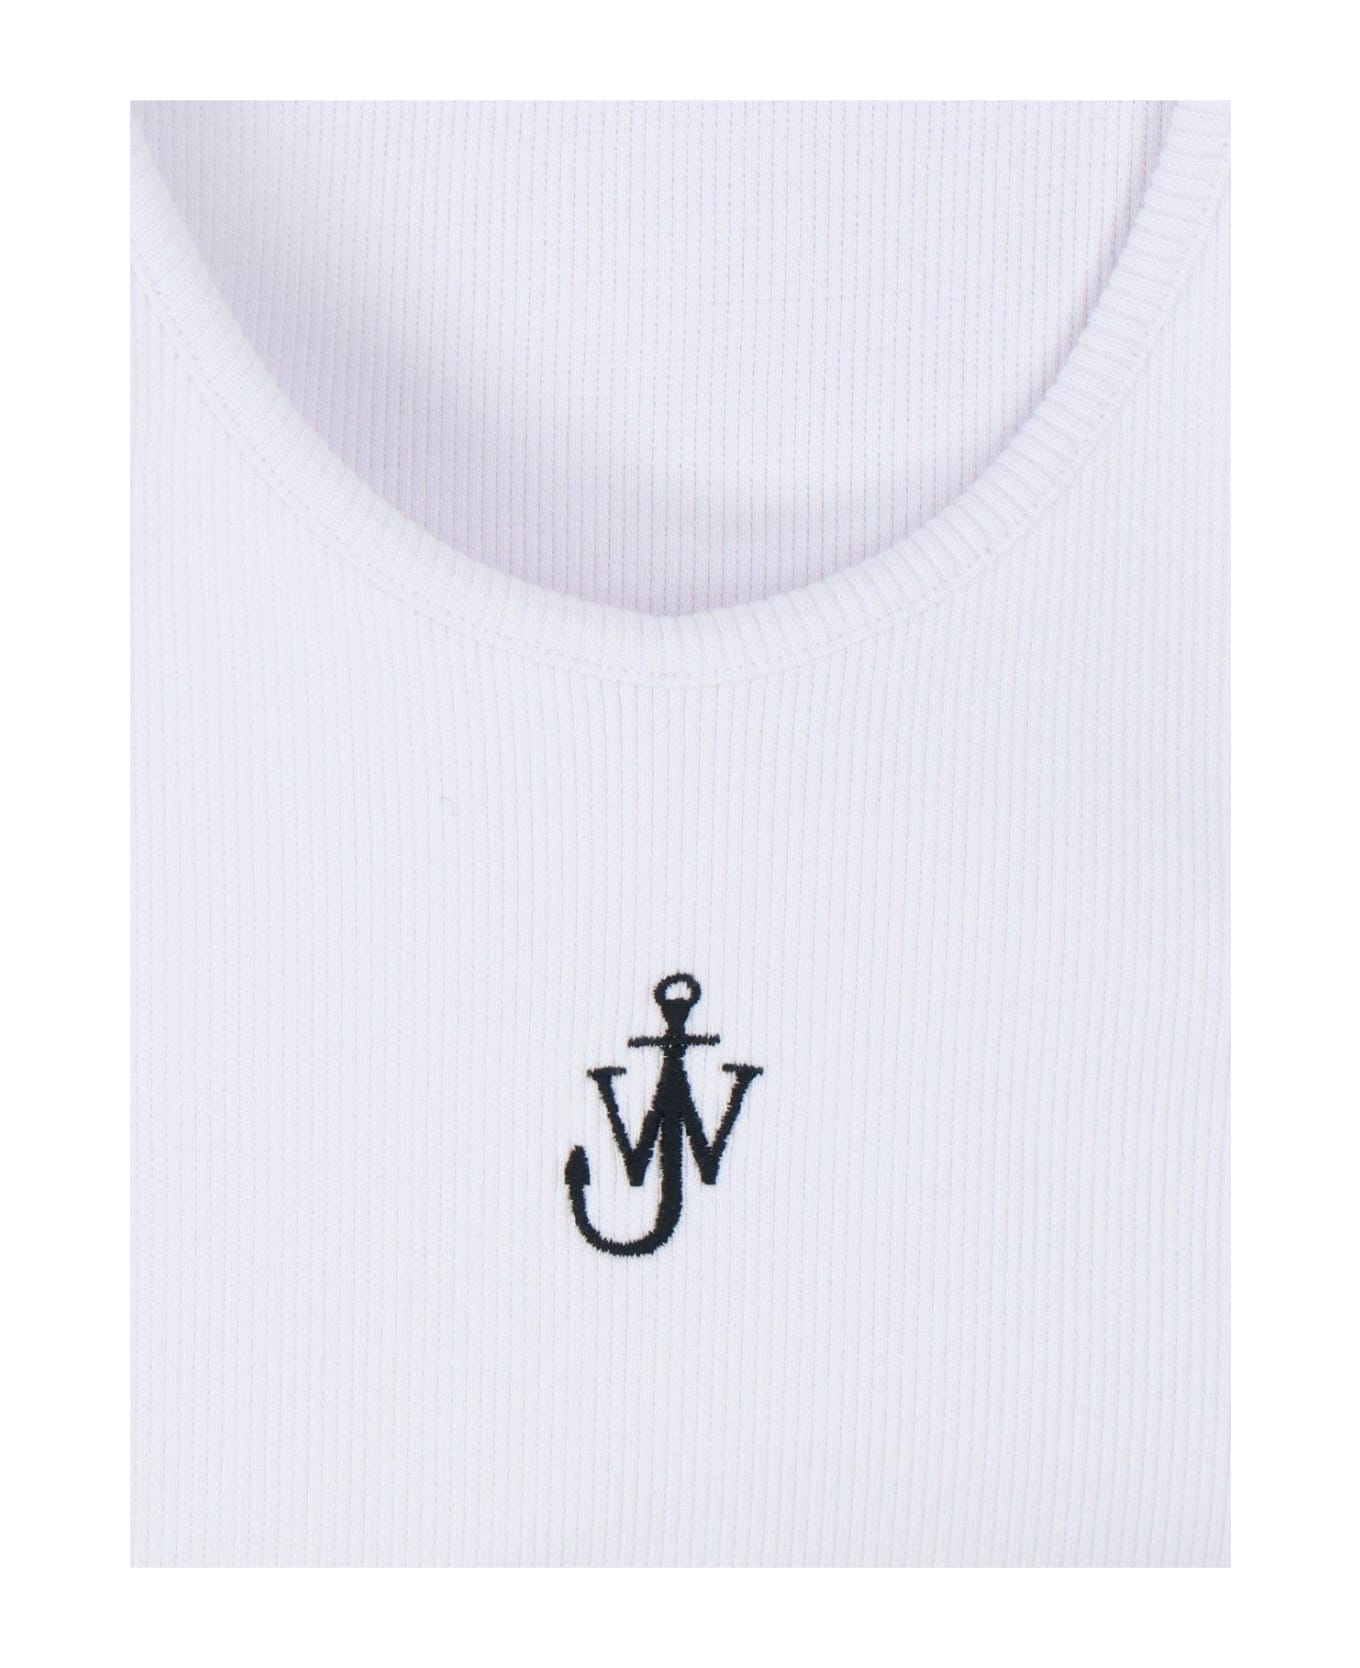 J.W. Anderson Logo Embroidered Ribbed Tank Top